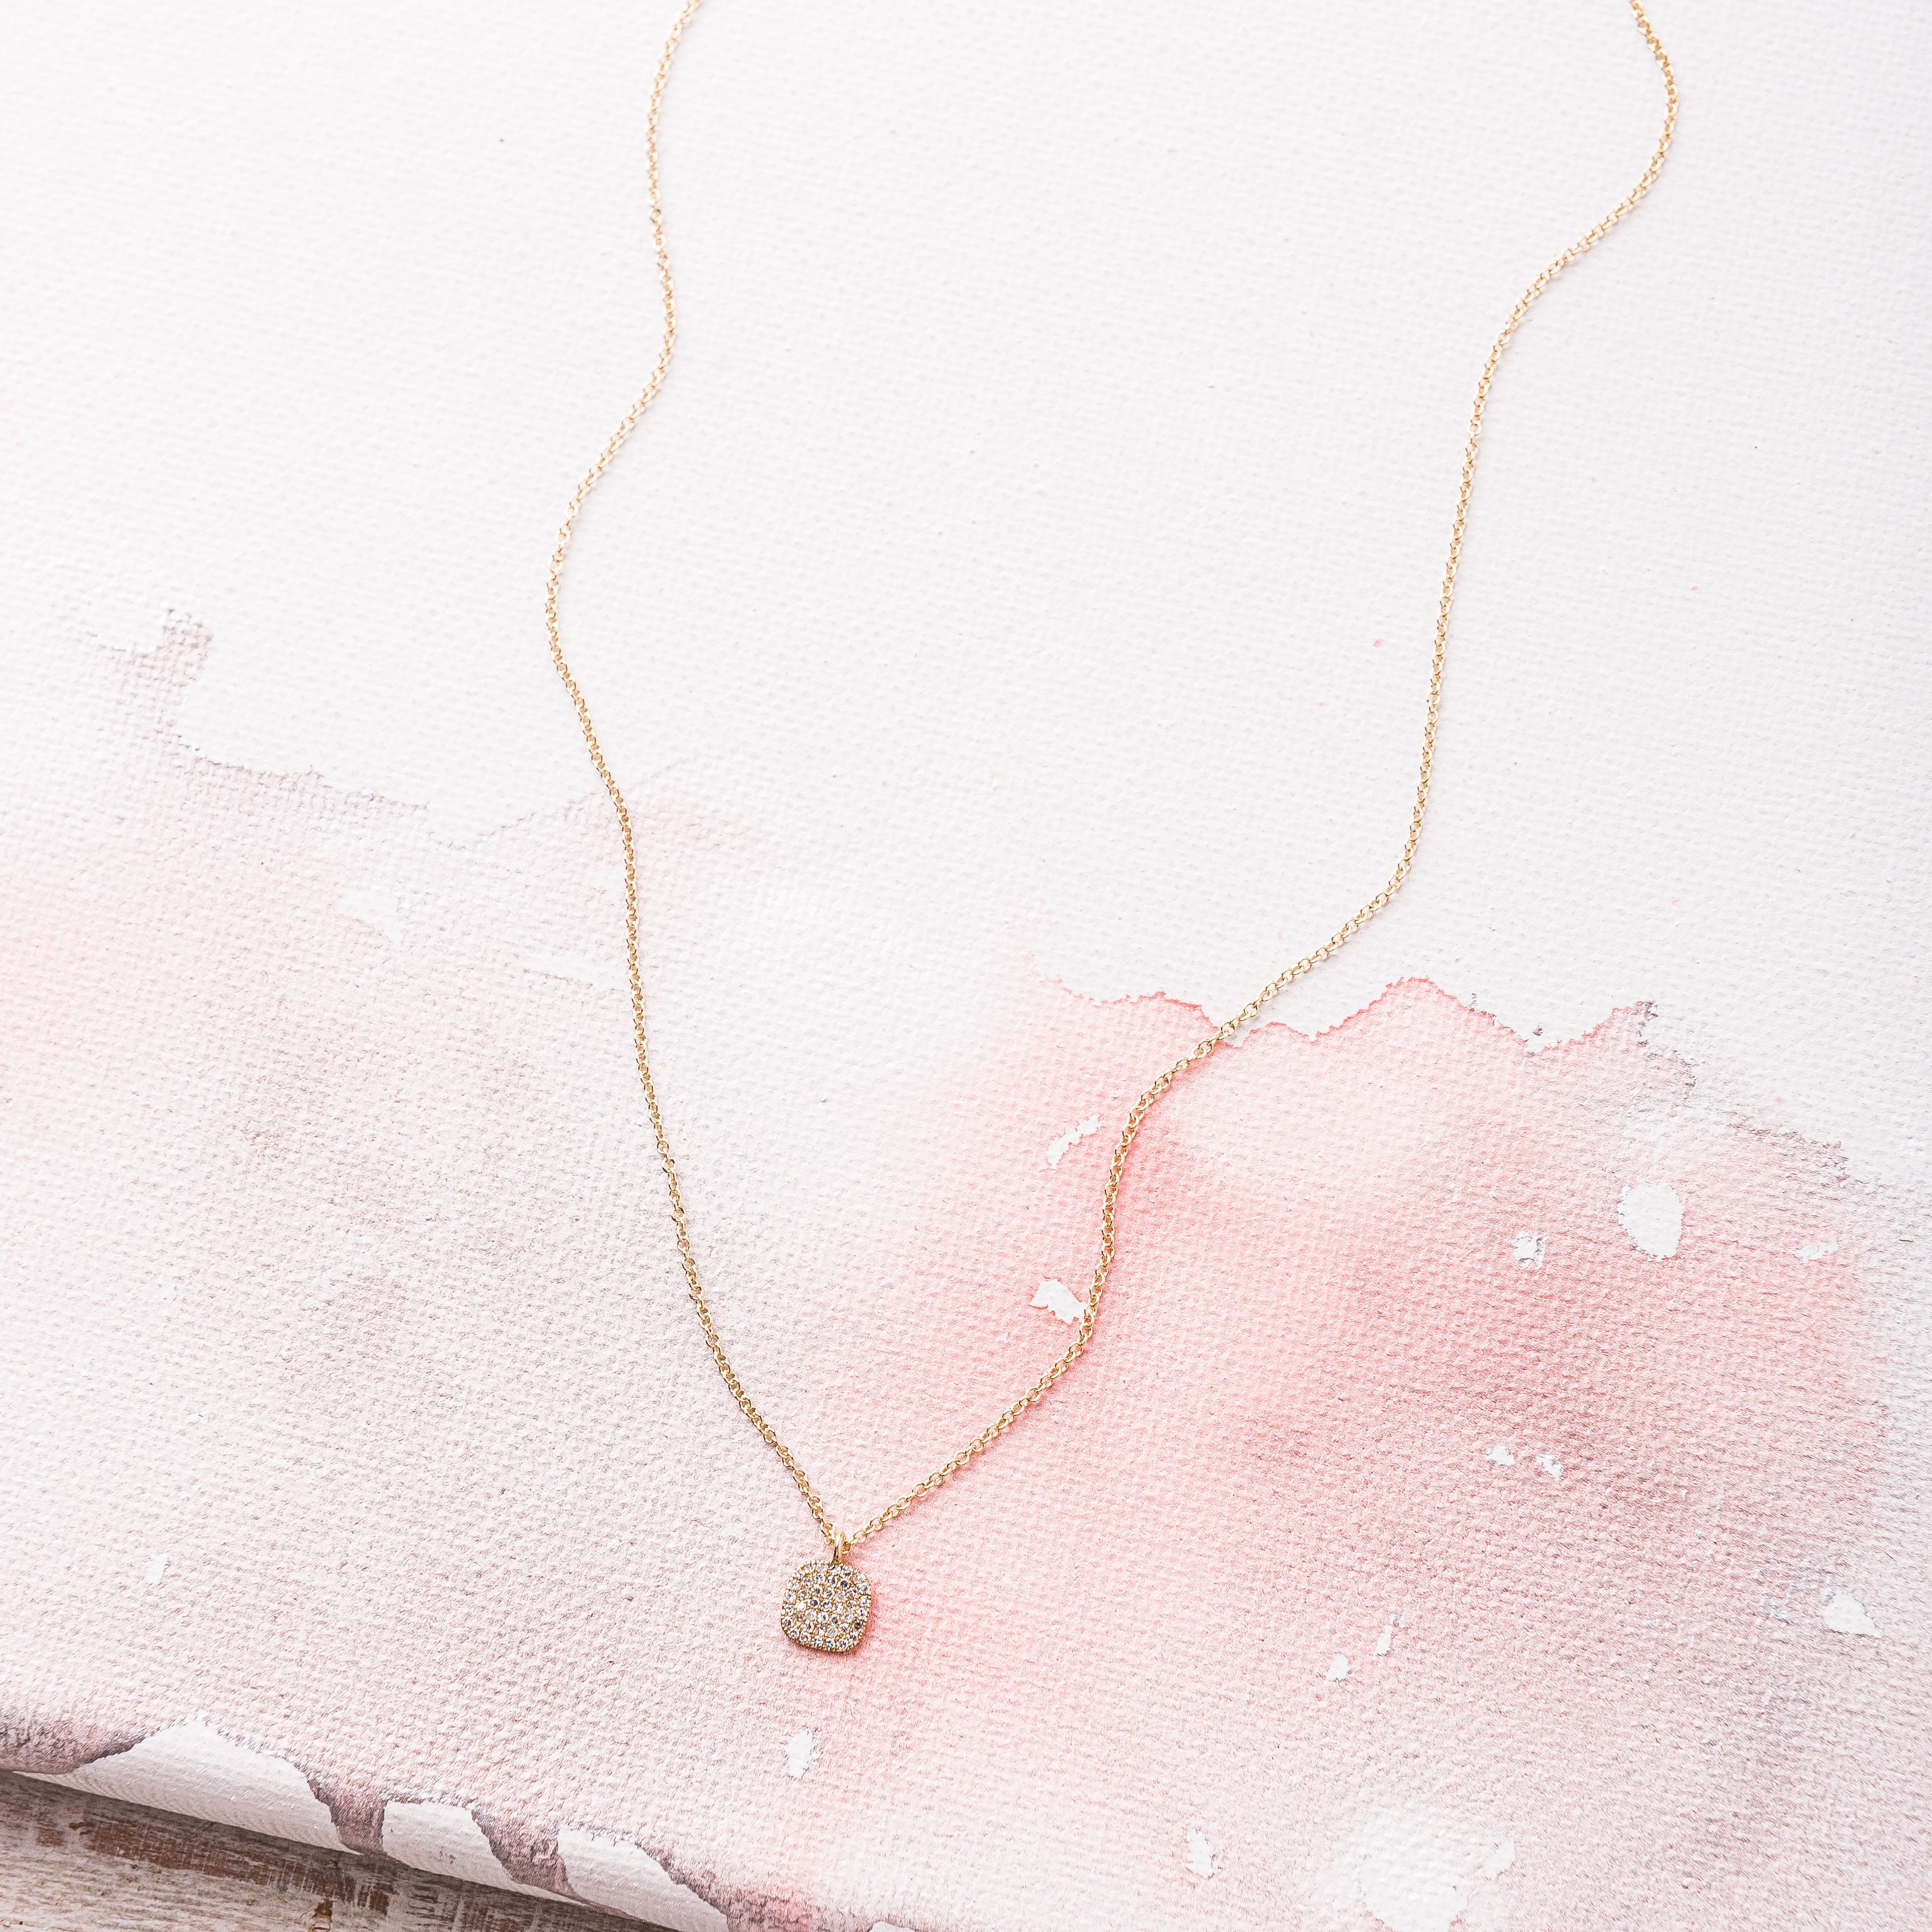 Diamond Pave Cushion Necklace in 14k Gold